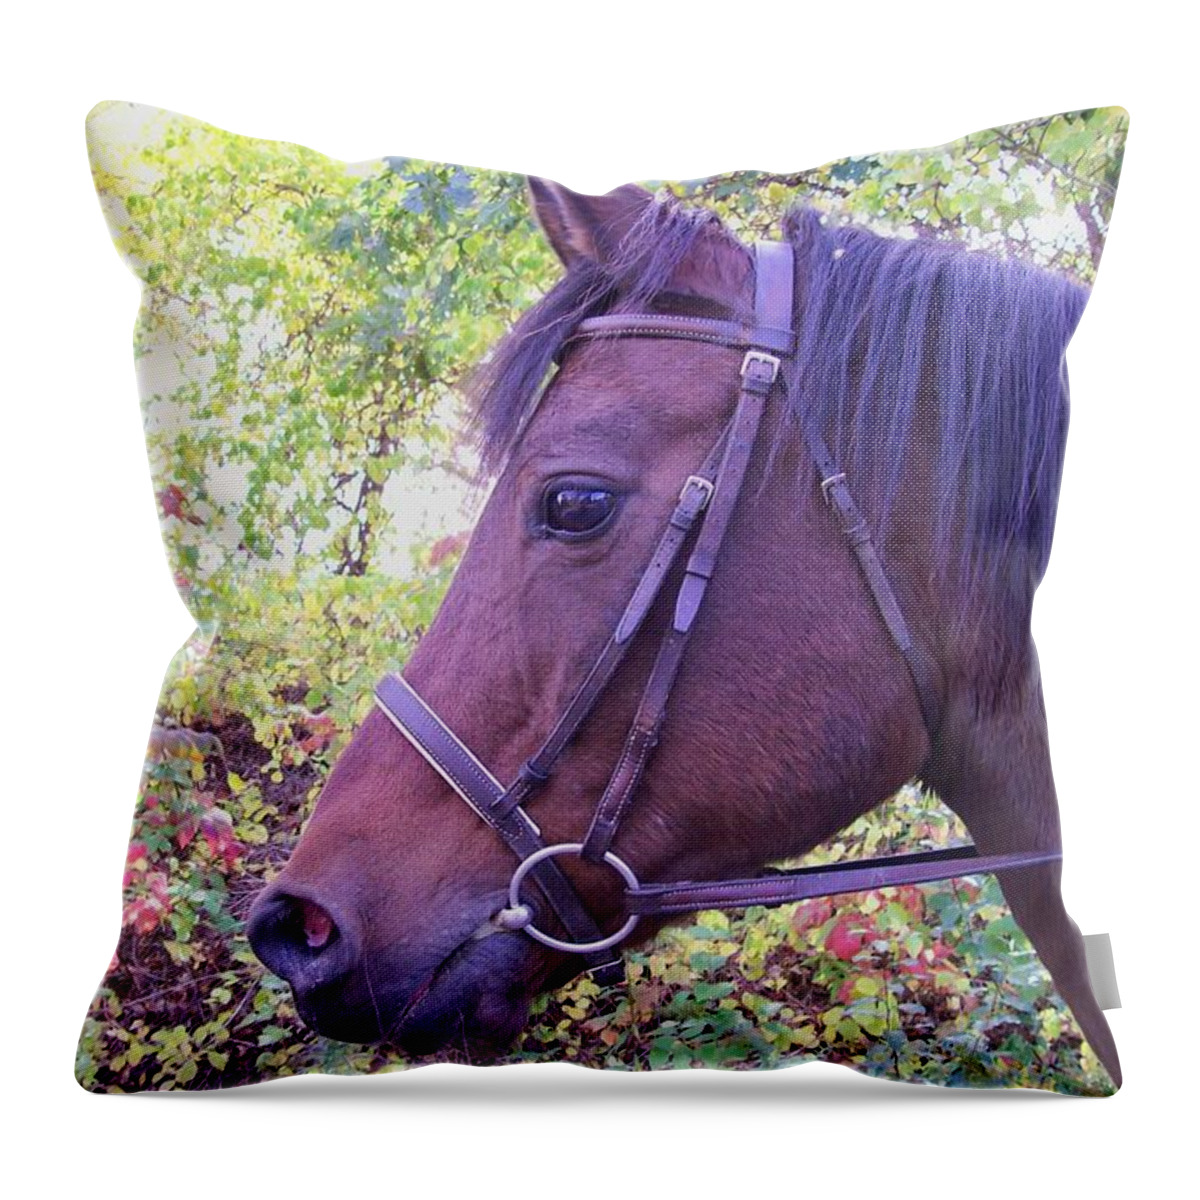 Photography Throw Pillow featuring the digital art Arabian Beauty by Barbara S Nickerson